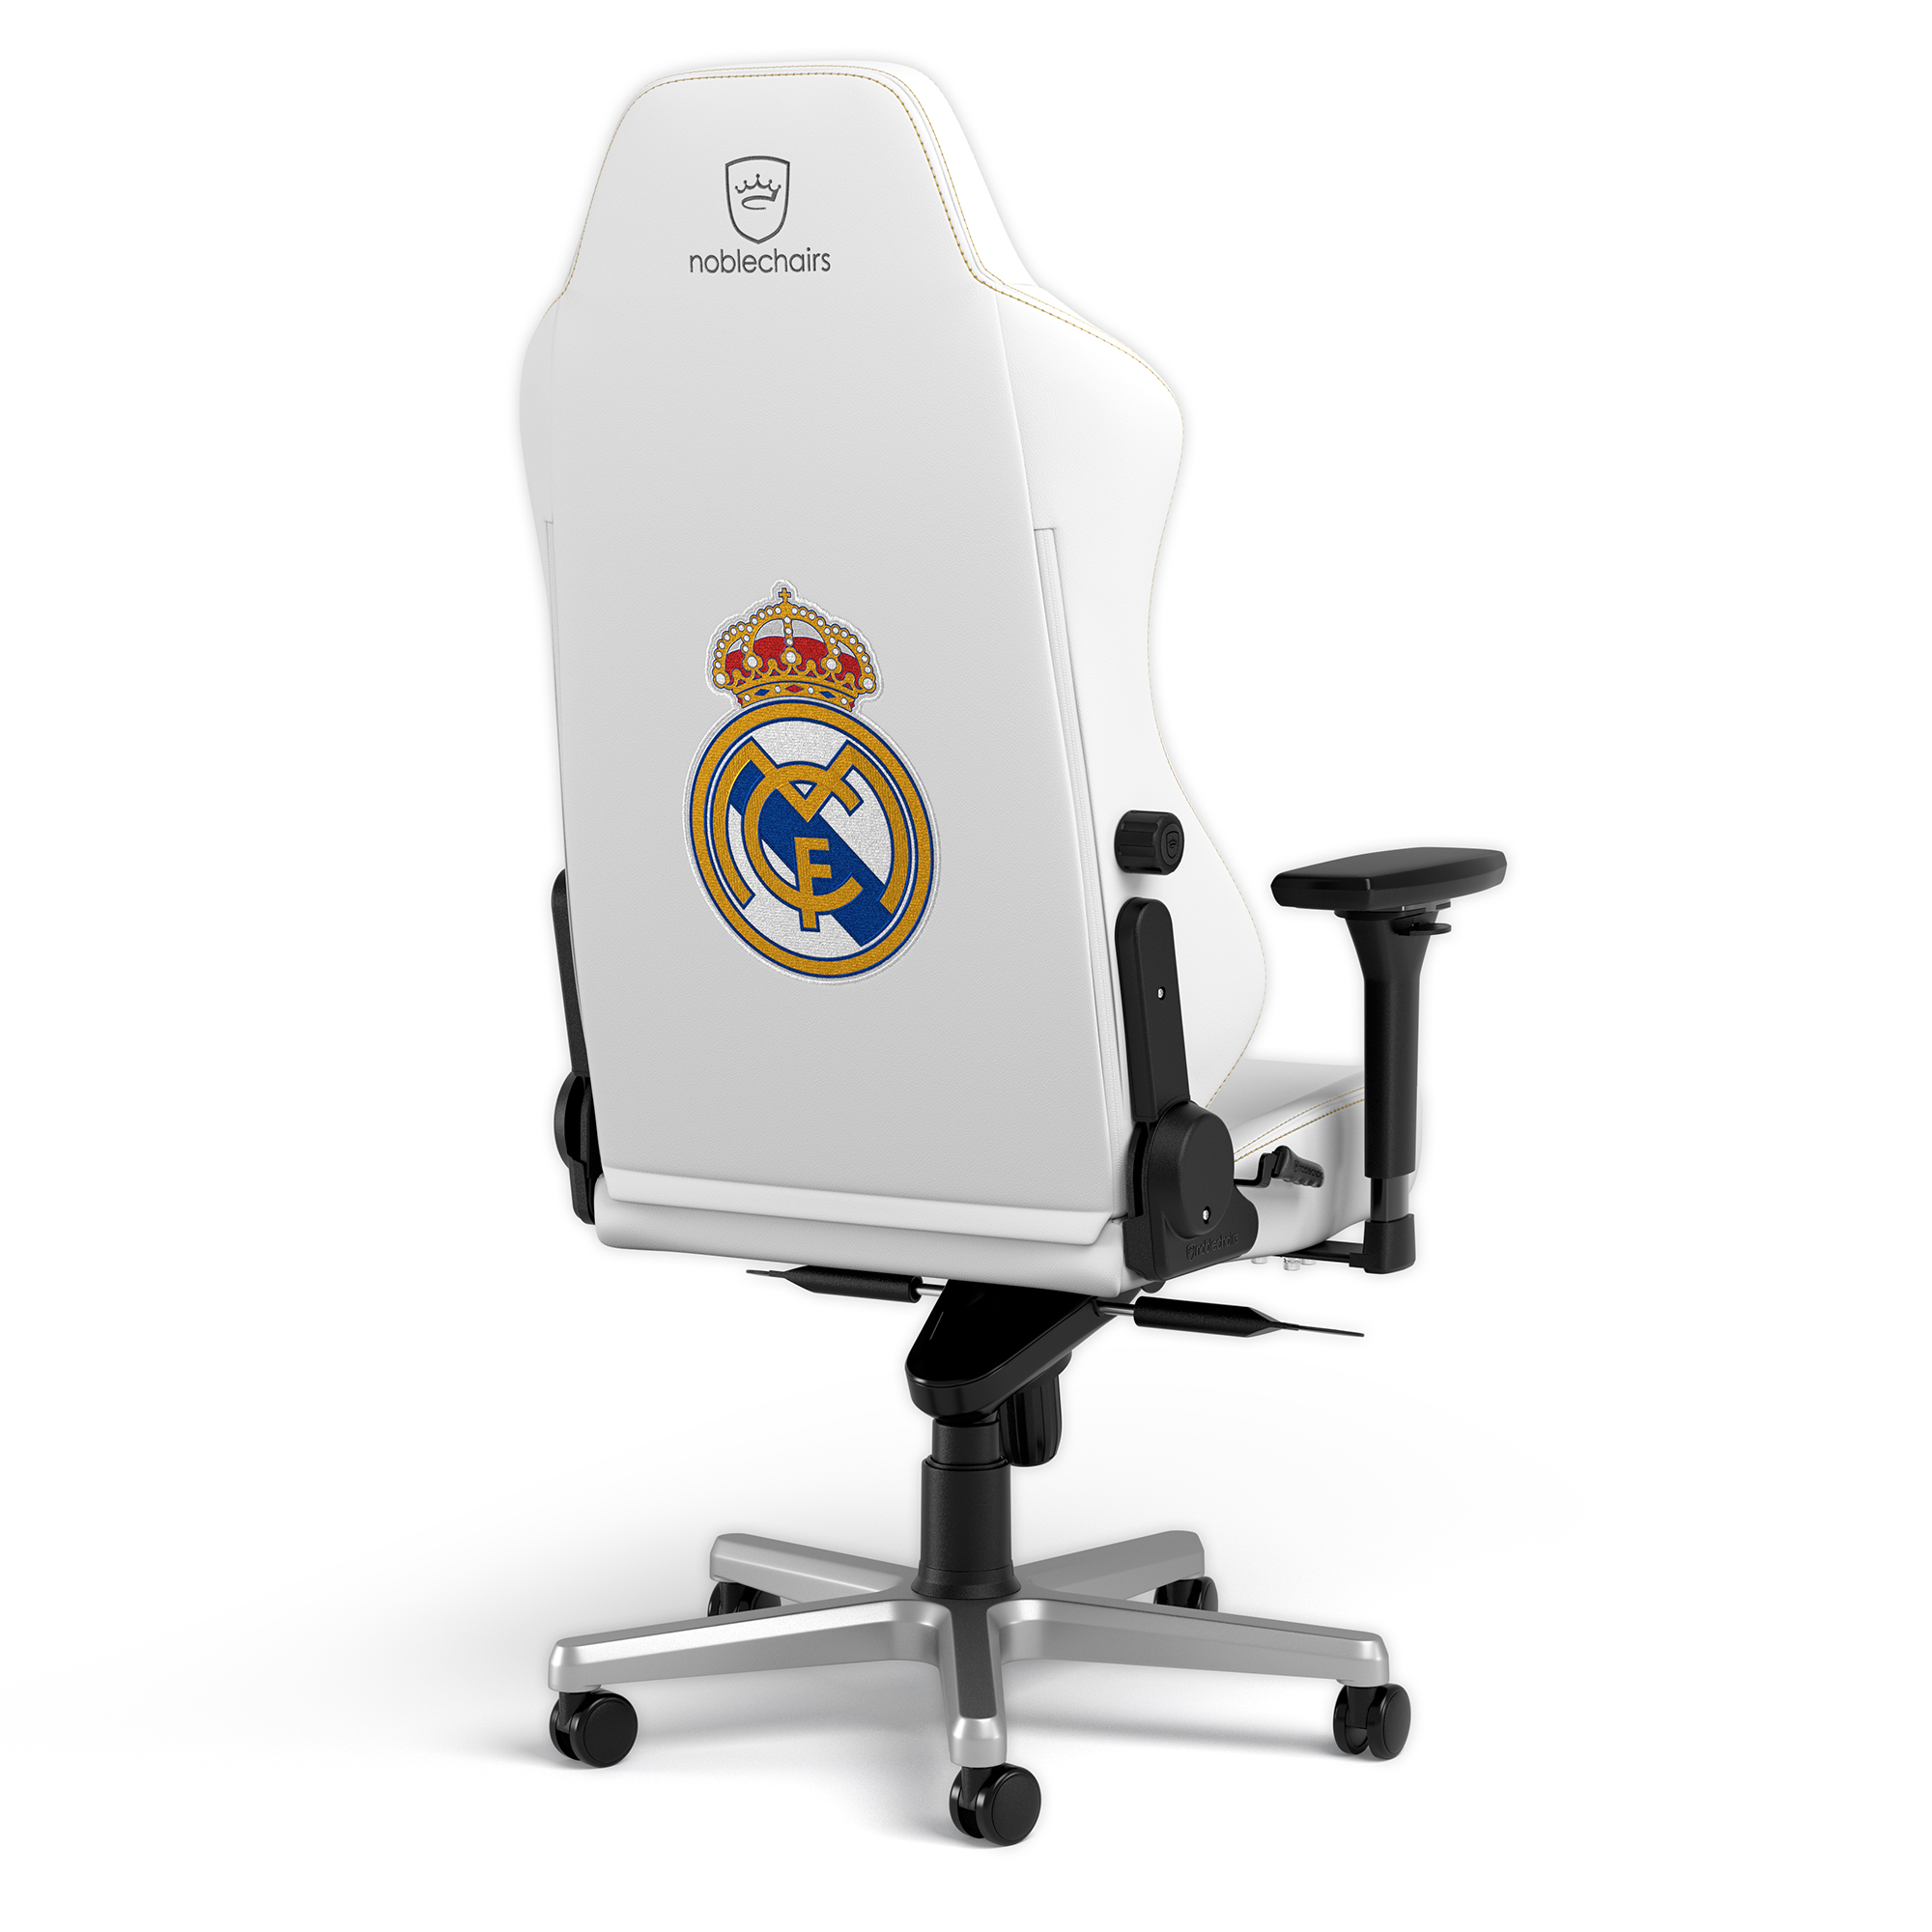 noblechairs - noblechairs HERO Real Madrid Edition Gaming Chair